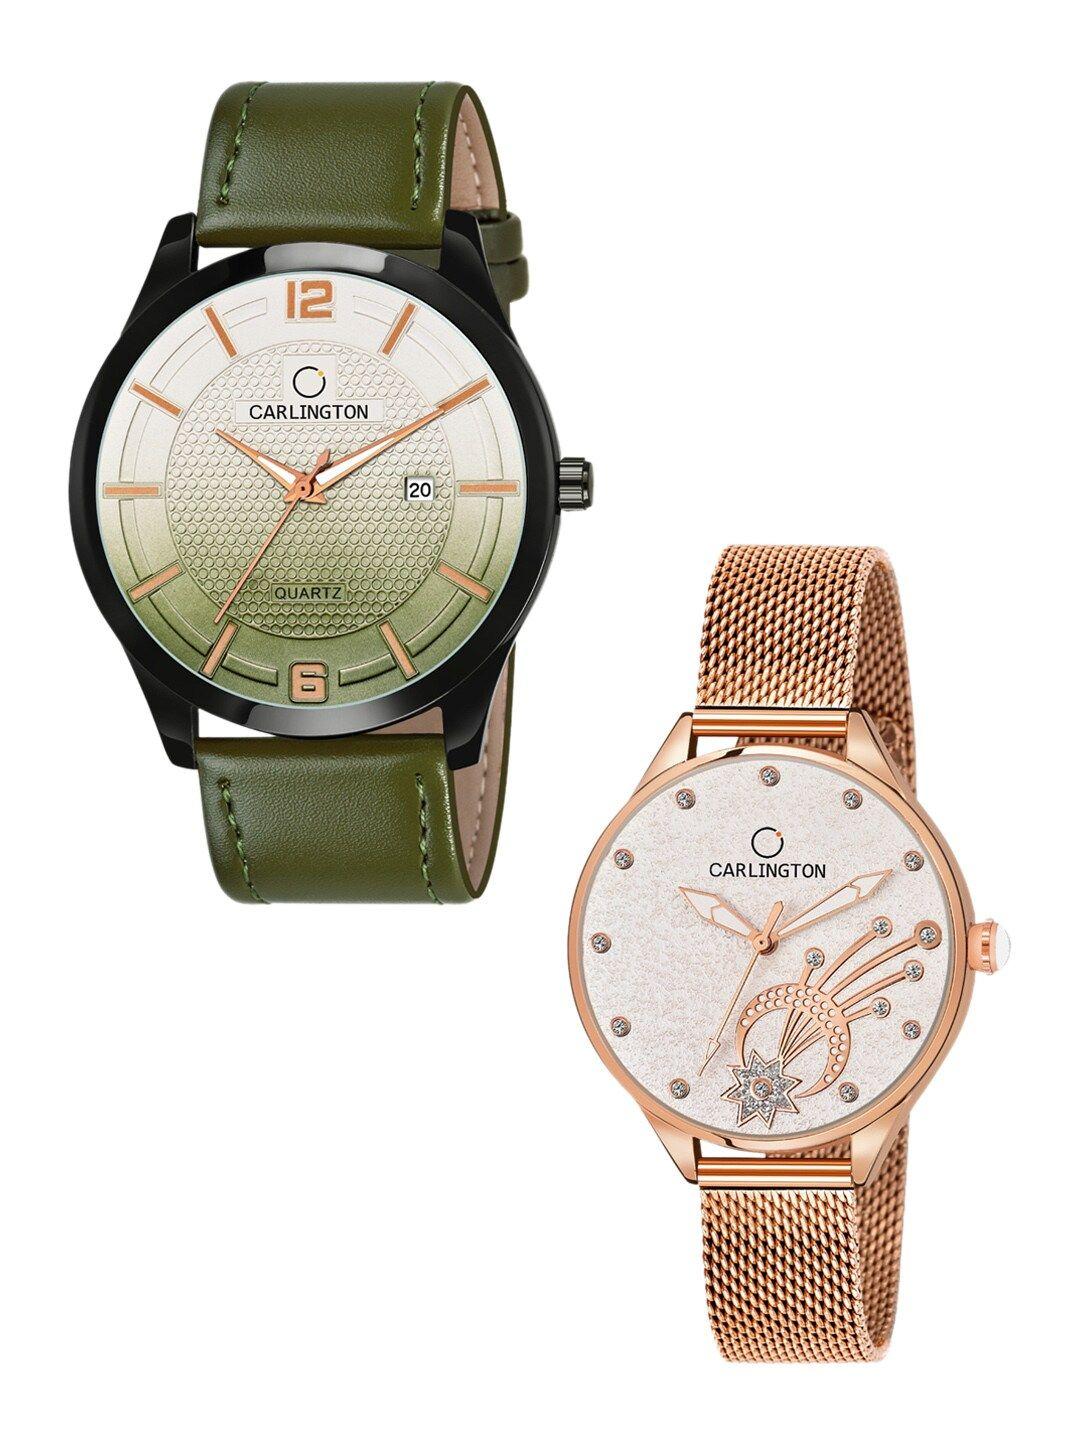 carlington his & her watch gift set combo ct1010 green - ct2020 rosewhite